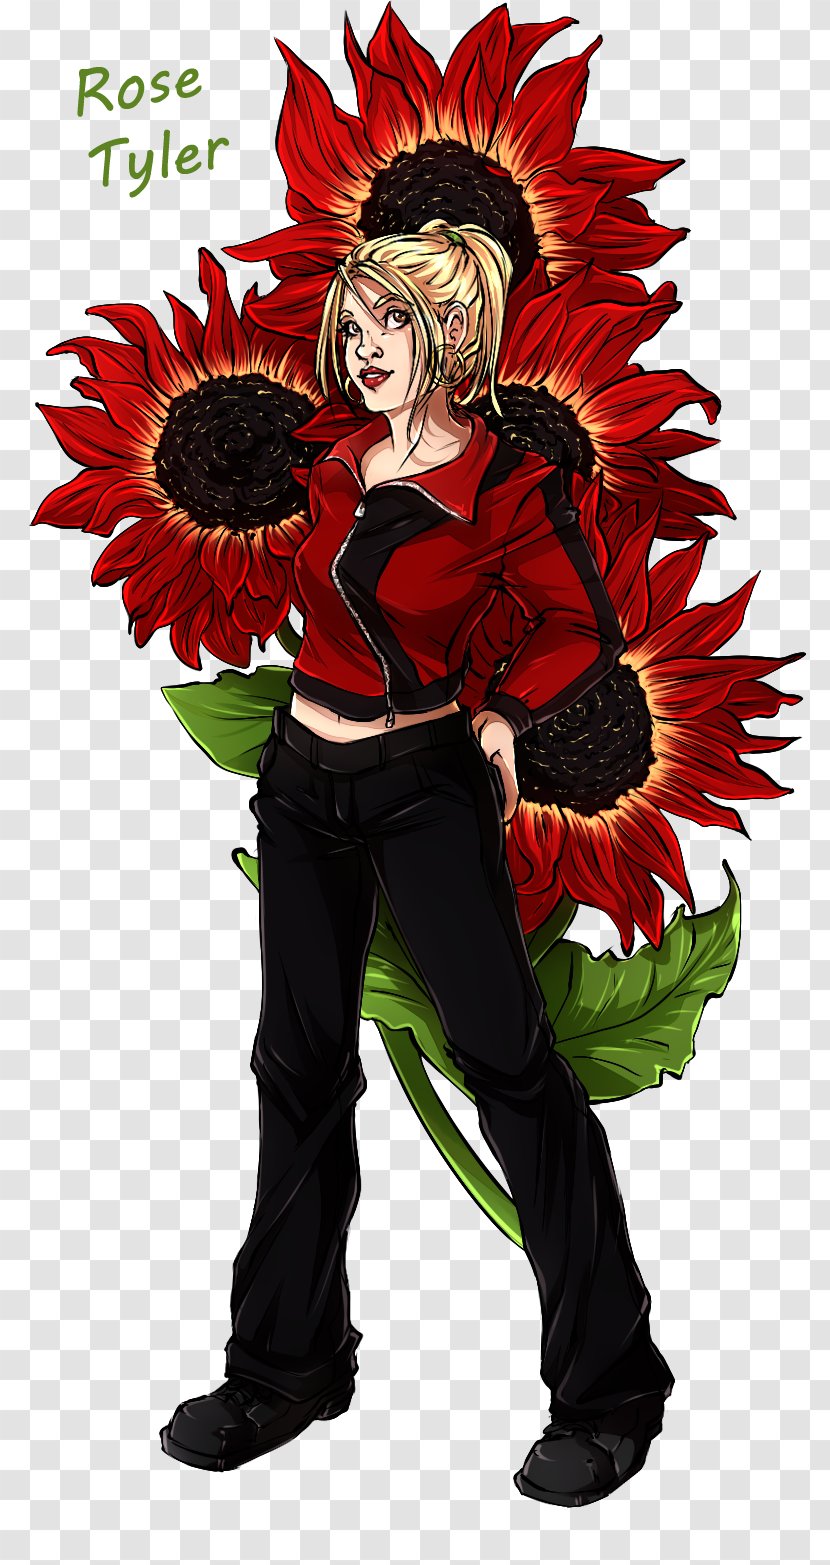 Common Sunflower Rose Tyler - Watercolor - Flower Transparent PNG